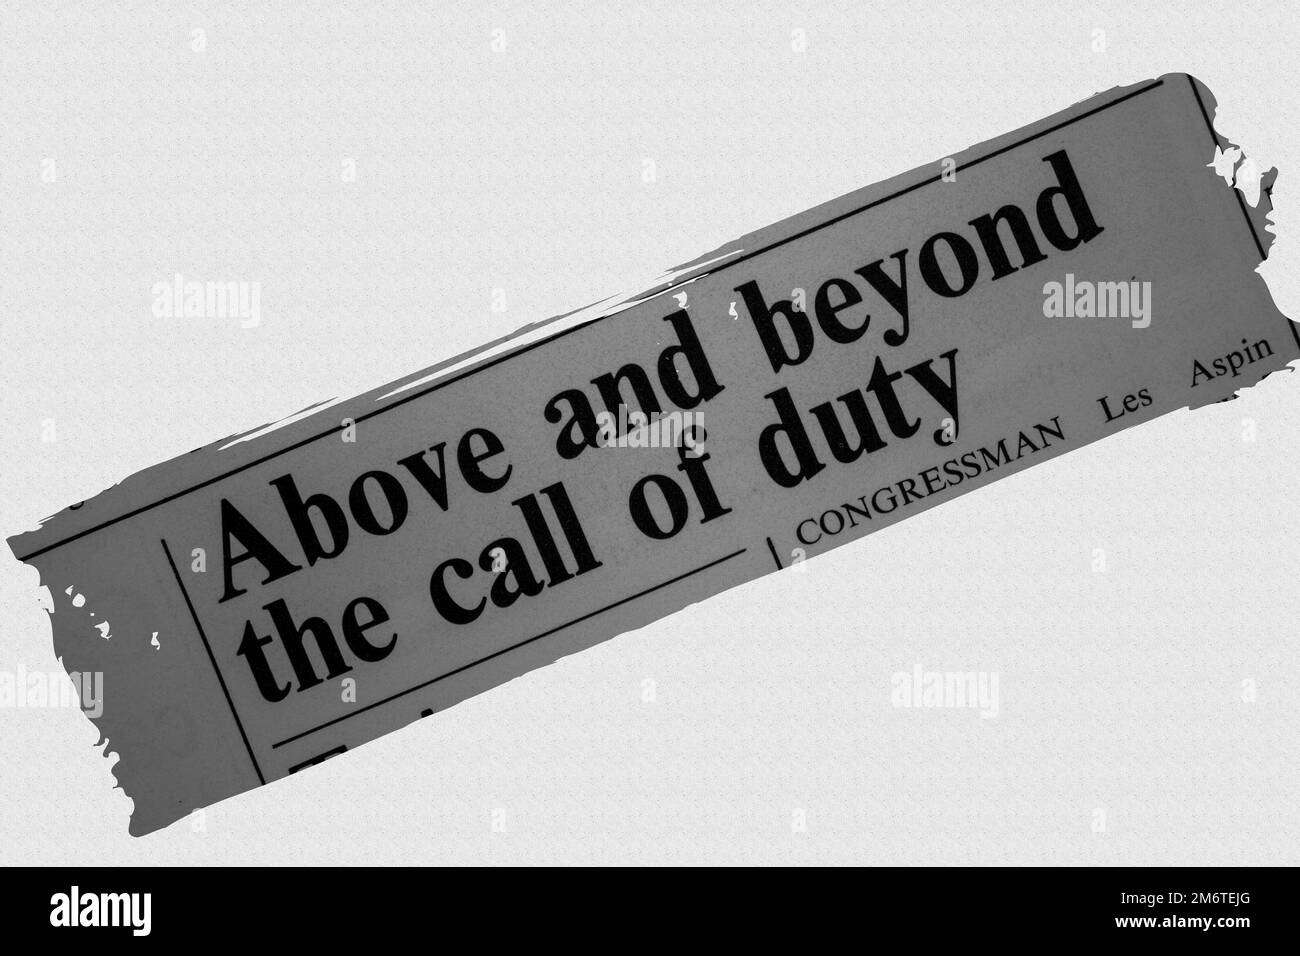 Above and beyond the call of duty - news story from 1975 newspaper headline article title - overlay Stock Photo